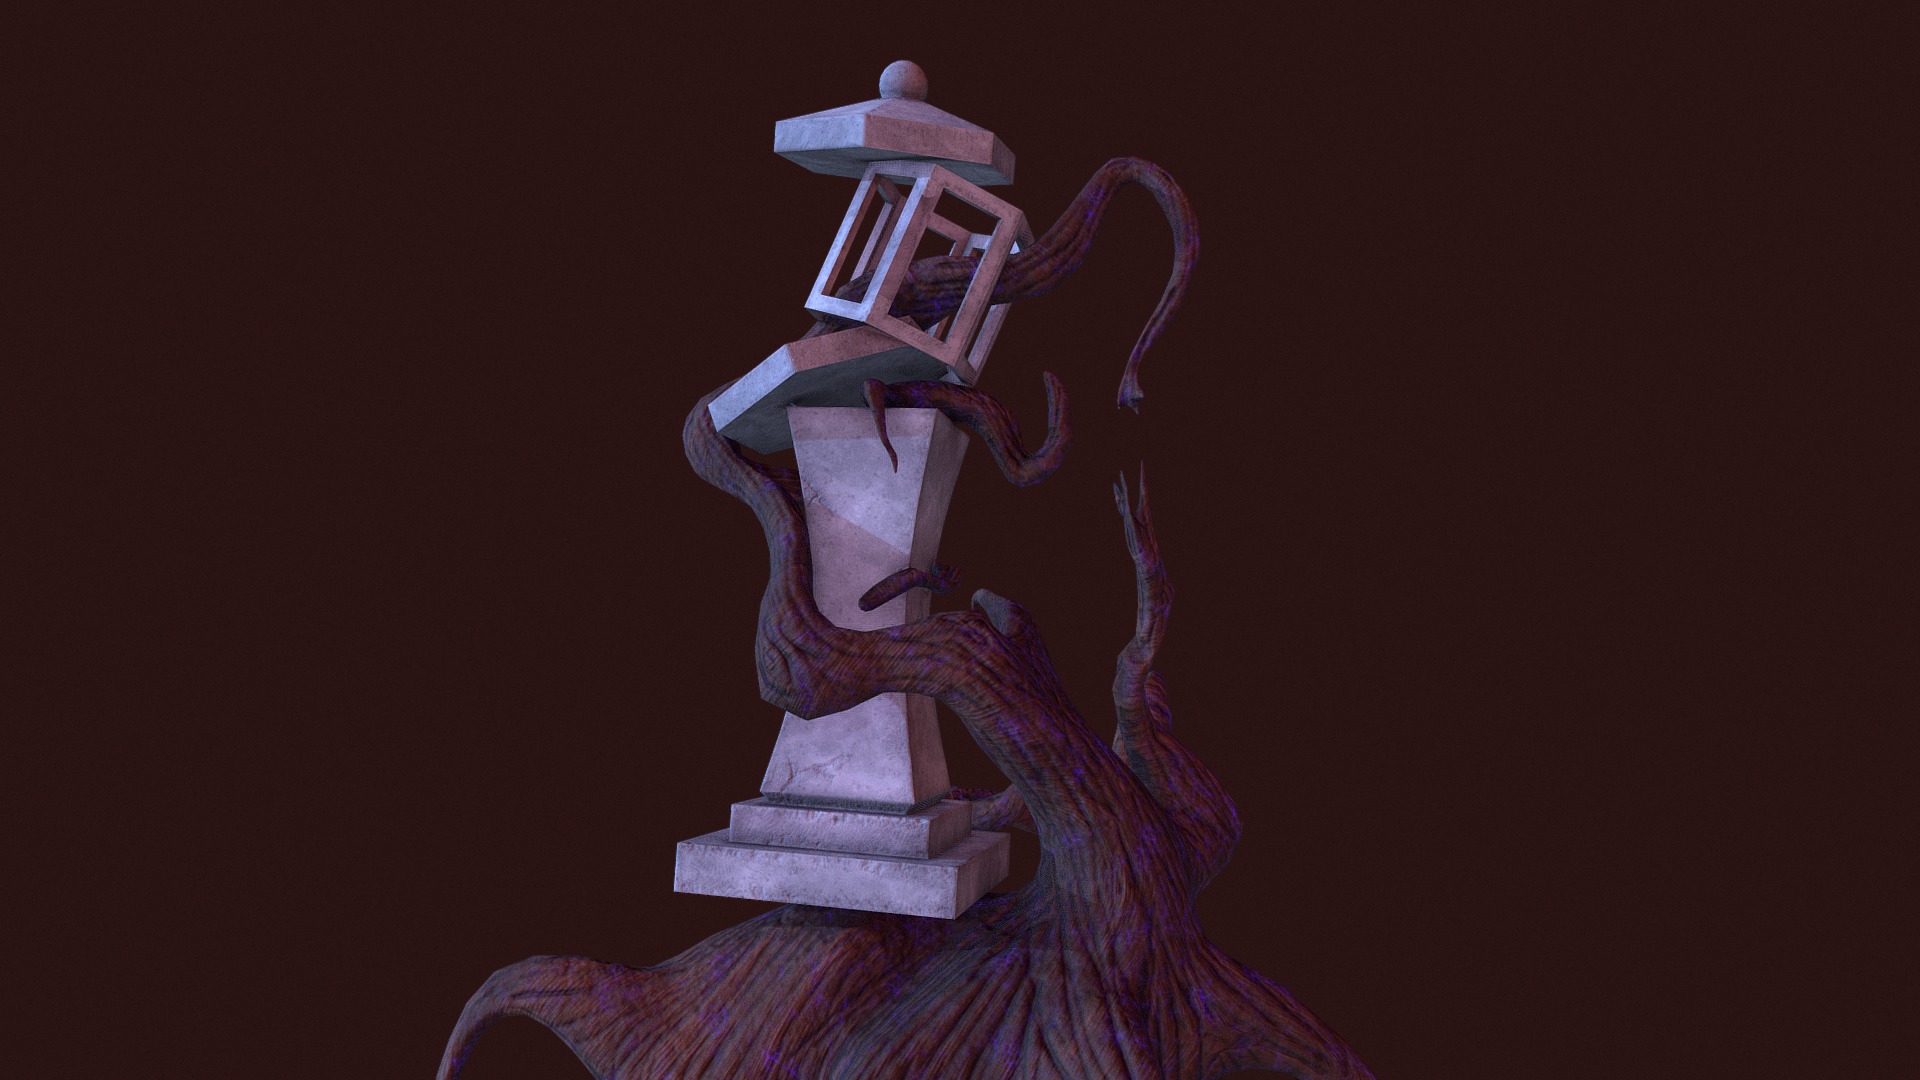 3D model Japanese Cursed Lantern - This is a 3D model of the Japanese Cursed Lantern. The 3D model is about a person in a white hat and scarf holding a white object.